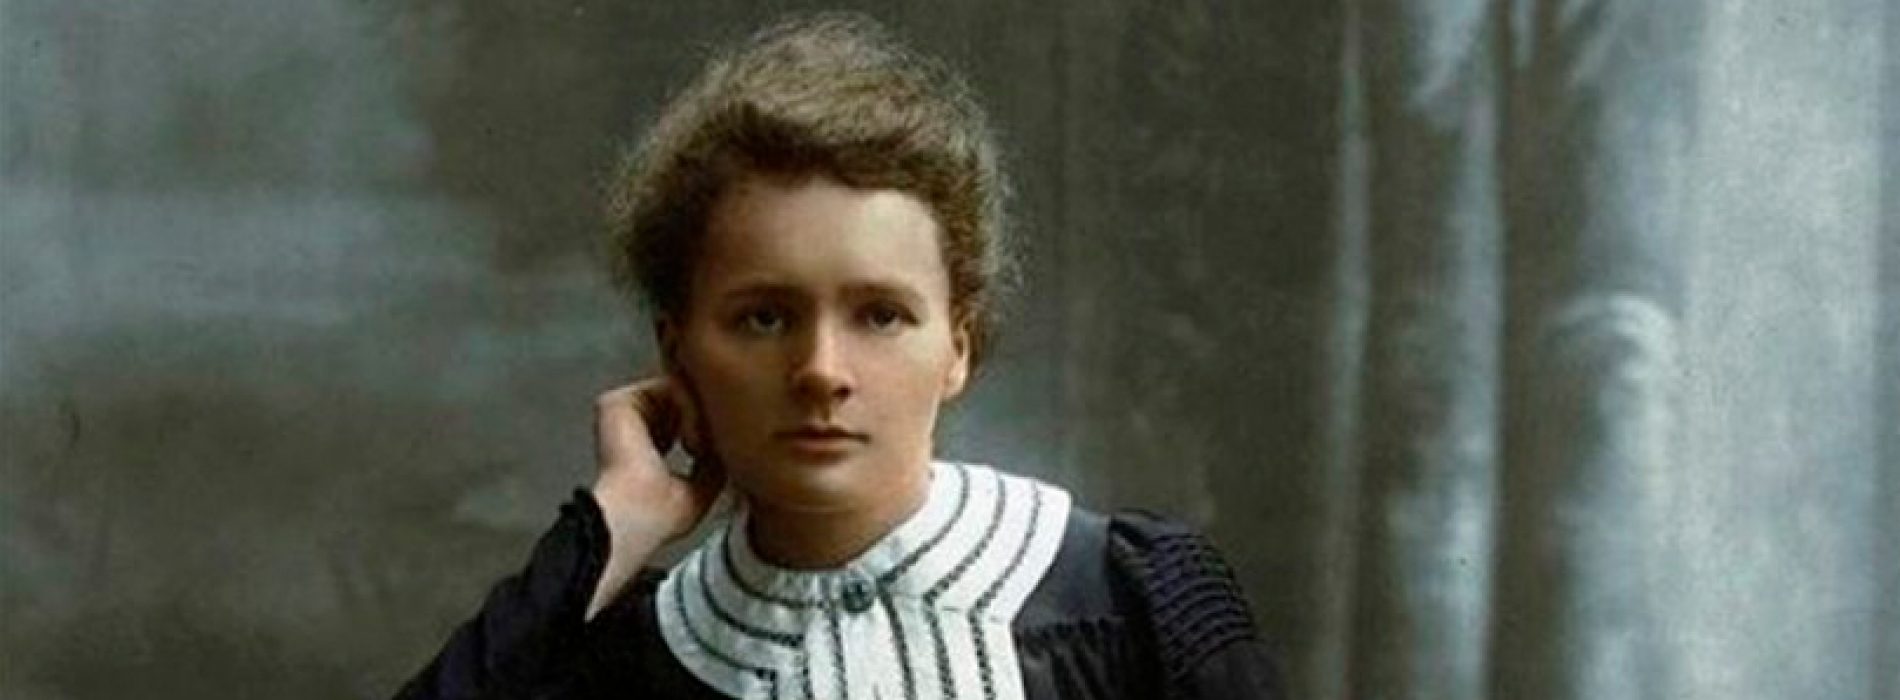 Marie Curie died 84 years ago: his thought, in 7 quotes